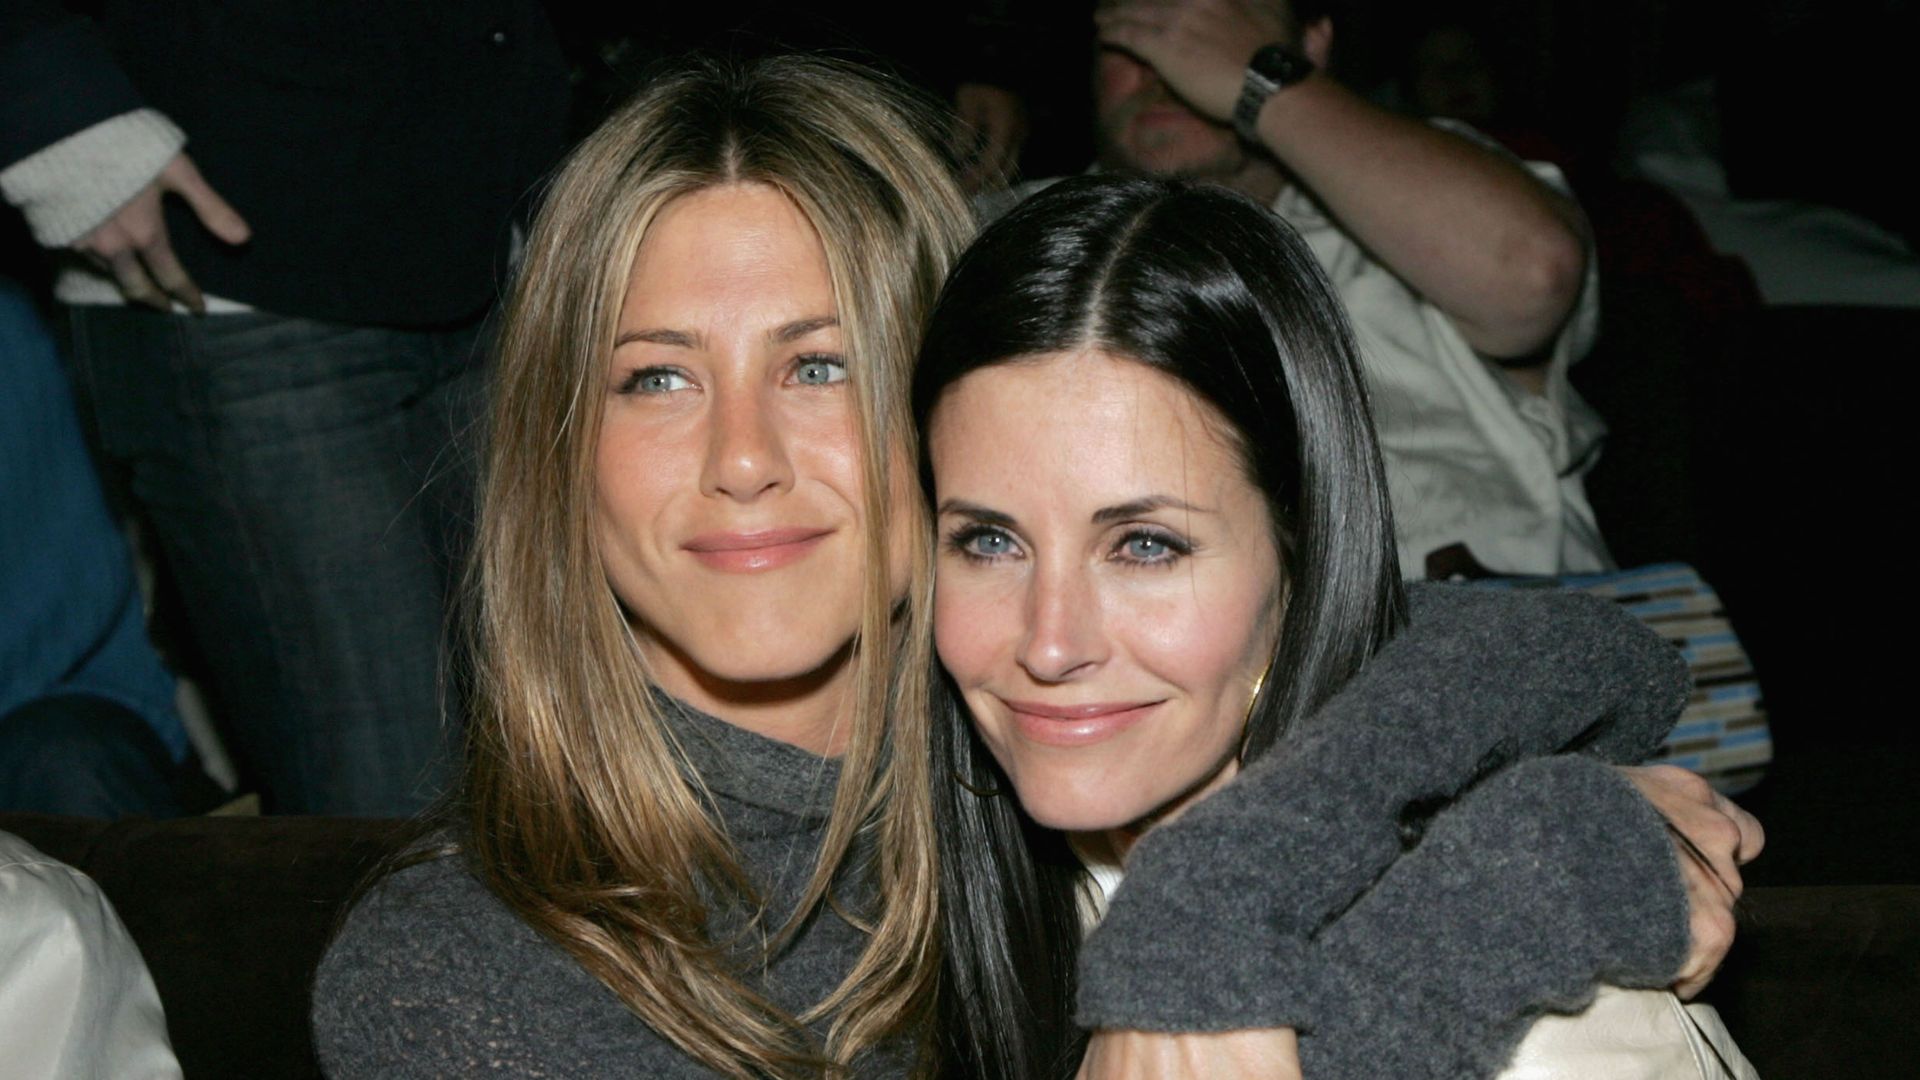 Jennifer Aniston and Courteney Cox attend the after party at the L.A. premiere for "The Tripper" held at the Hollywood Forever Cemetary on April 11, 2007 in Los Angeles, California